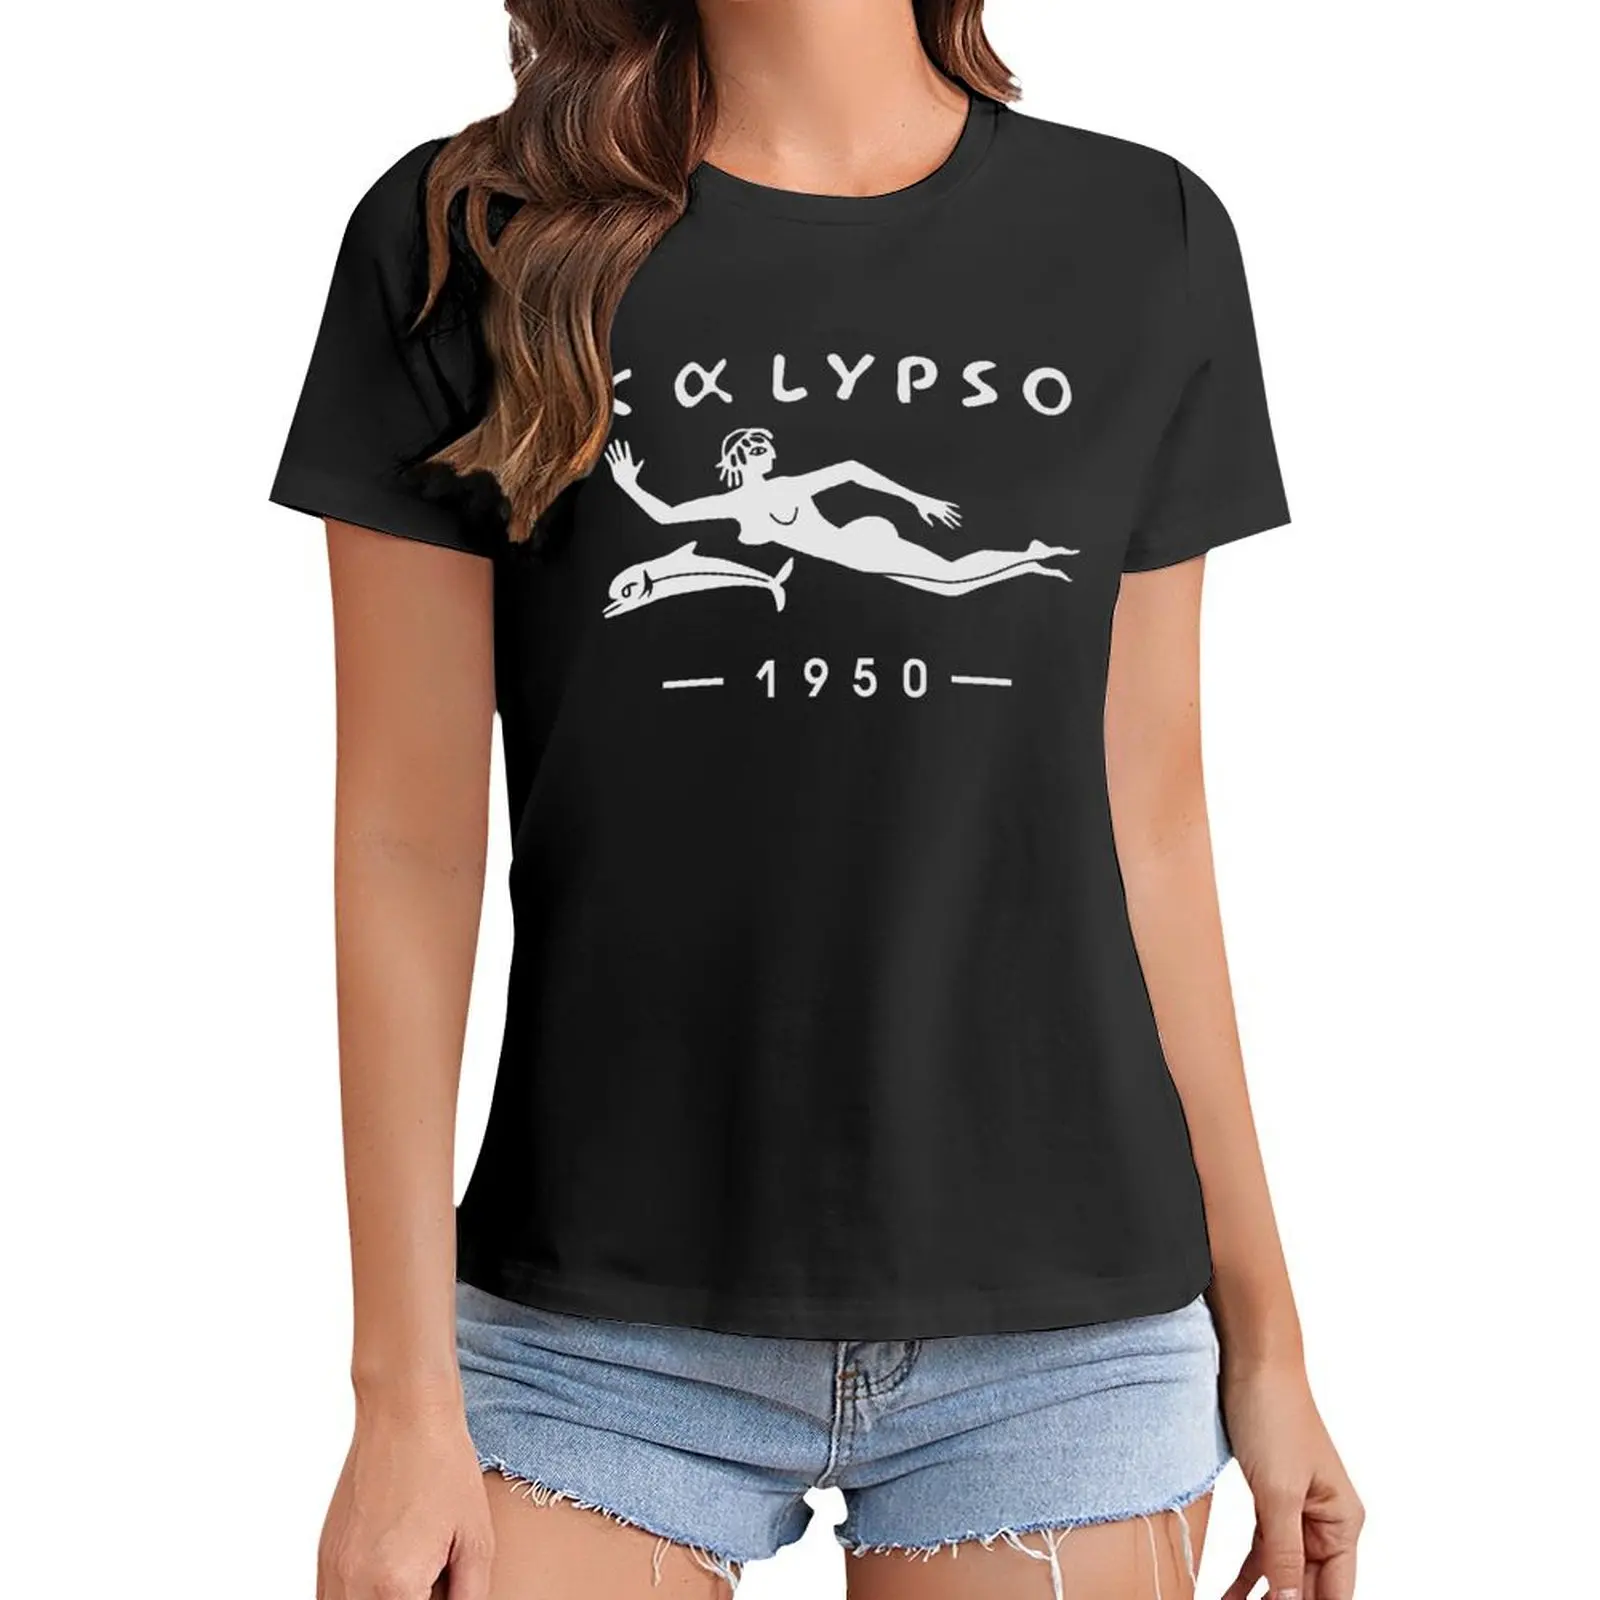 

RV Calypso, Jacques Yves Cousteau T-Shirt korean fashion graphics customs t shirts for Women graphic